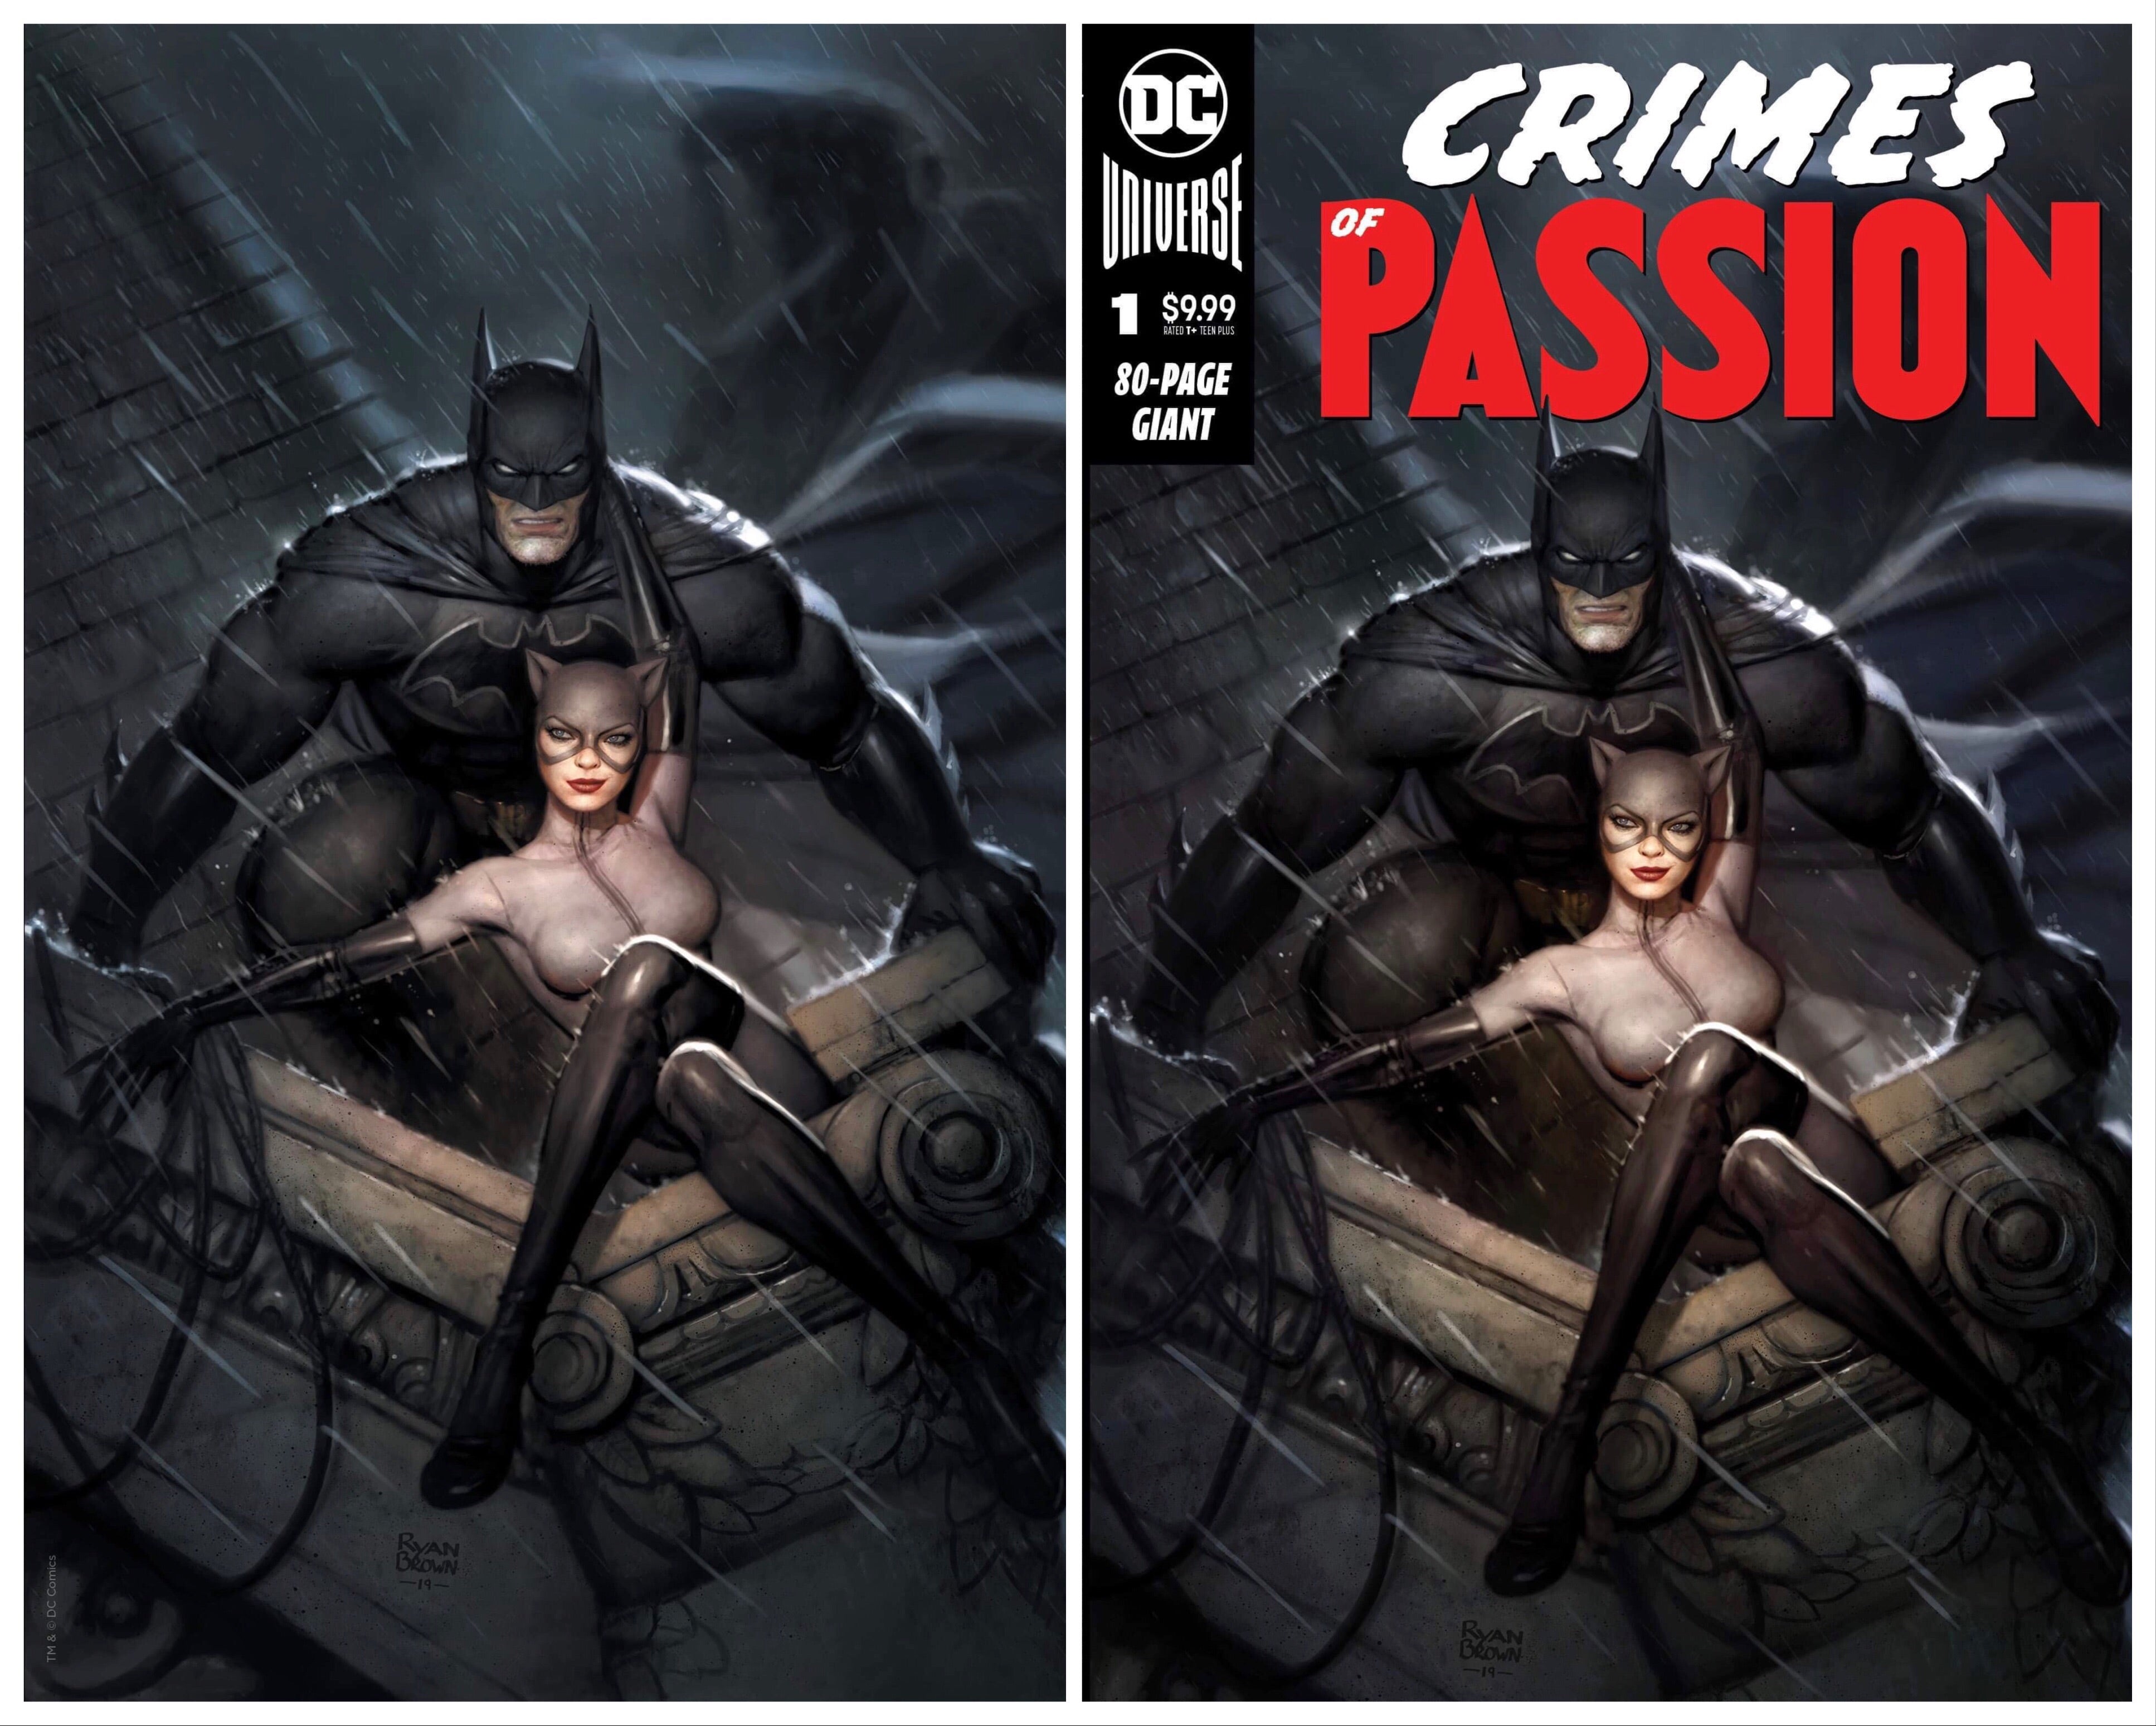 DC CRIMES OF PASSION #1 RYAN BROWN EXCLUSIVE VARIANT COVER OPTION